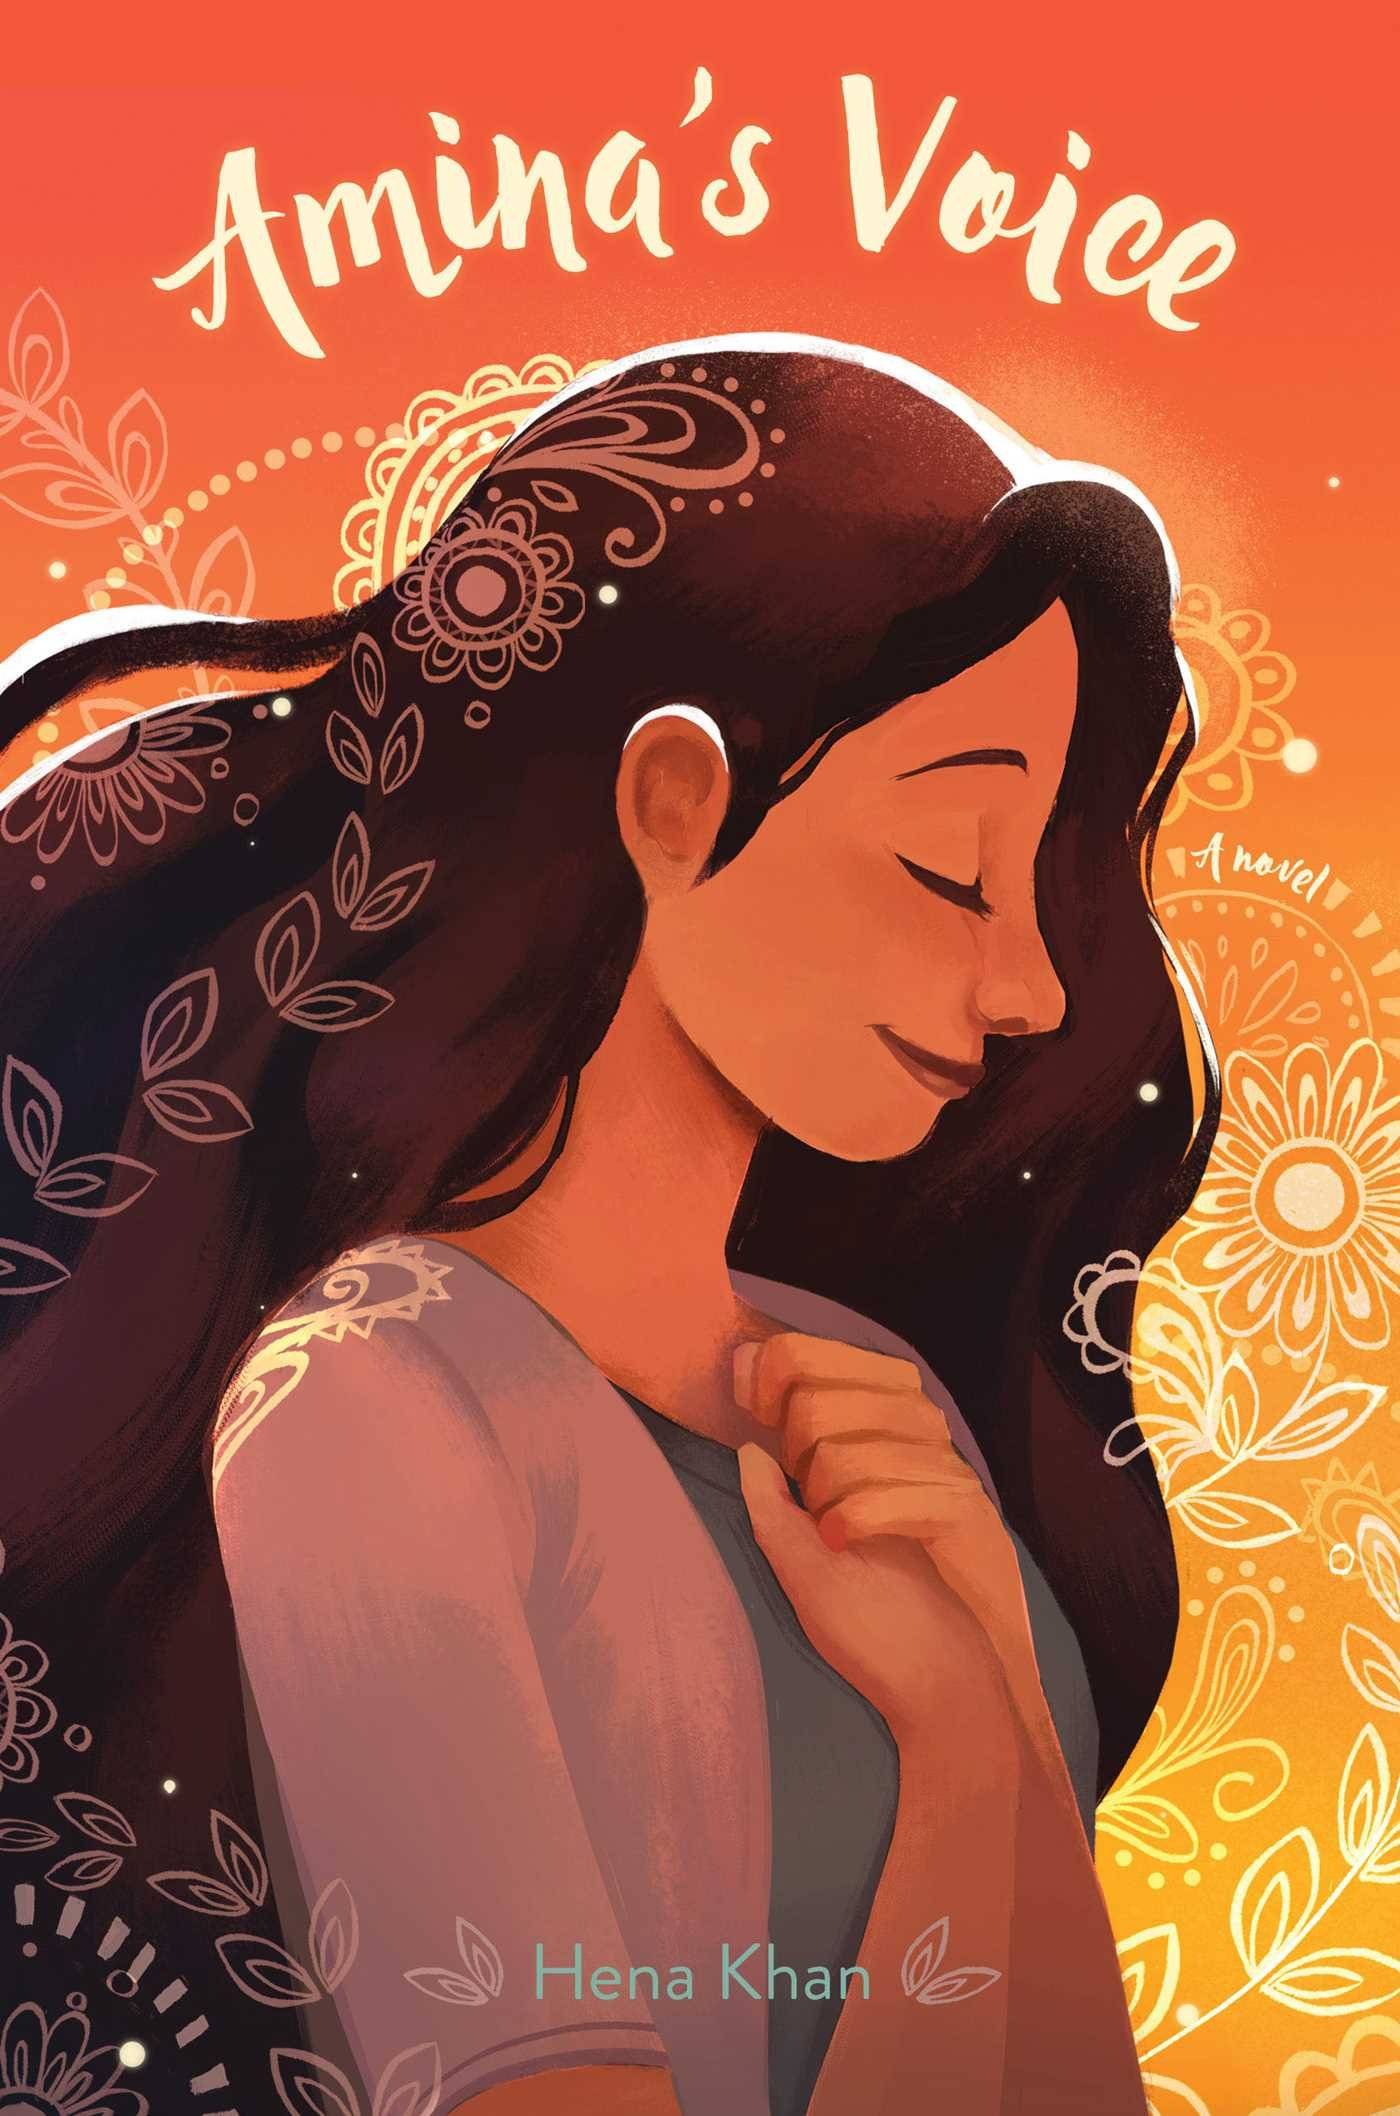 Illustrated book cover of "Amina's Voice" featuring the side profile of Amina holding her hands to her heart.